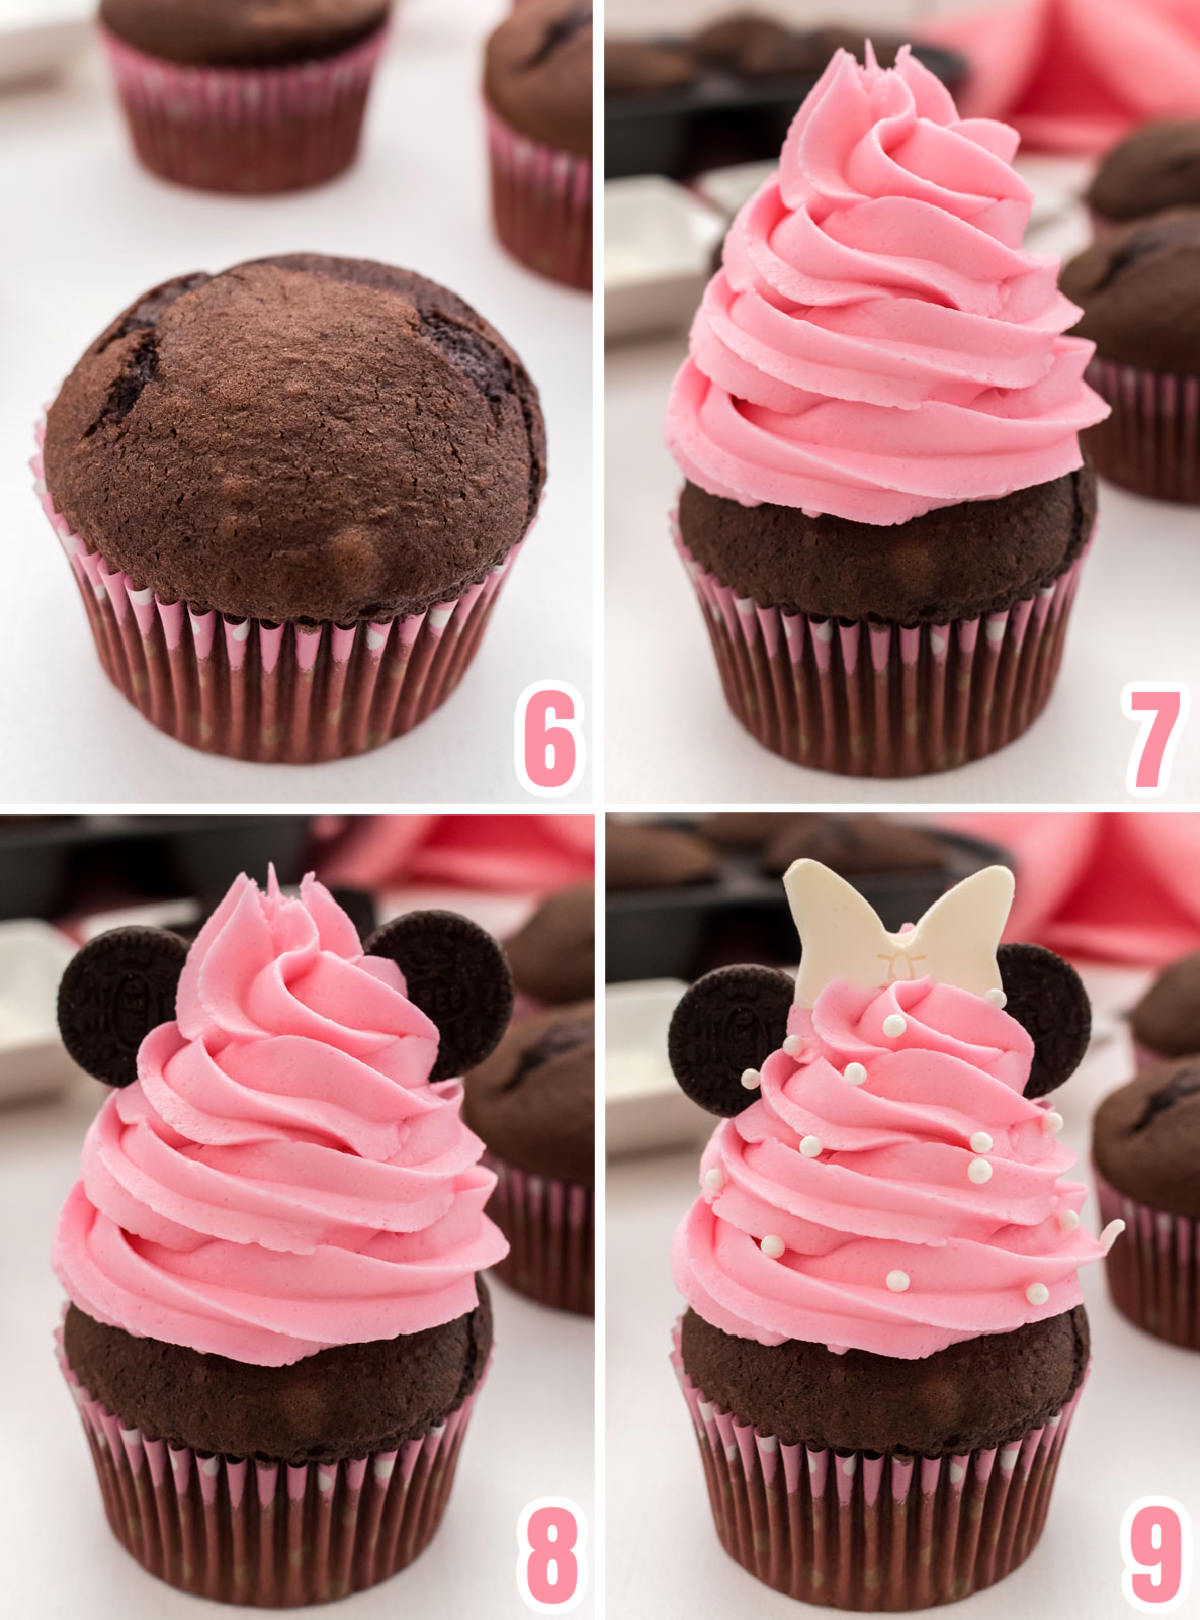 Collage image showing the steps to decorating the Minnie Mouse Cupcake including frosting, adding the ears and the sugar pearls.